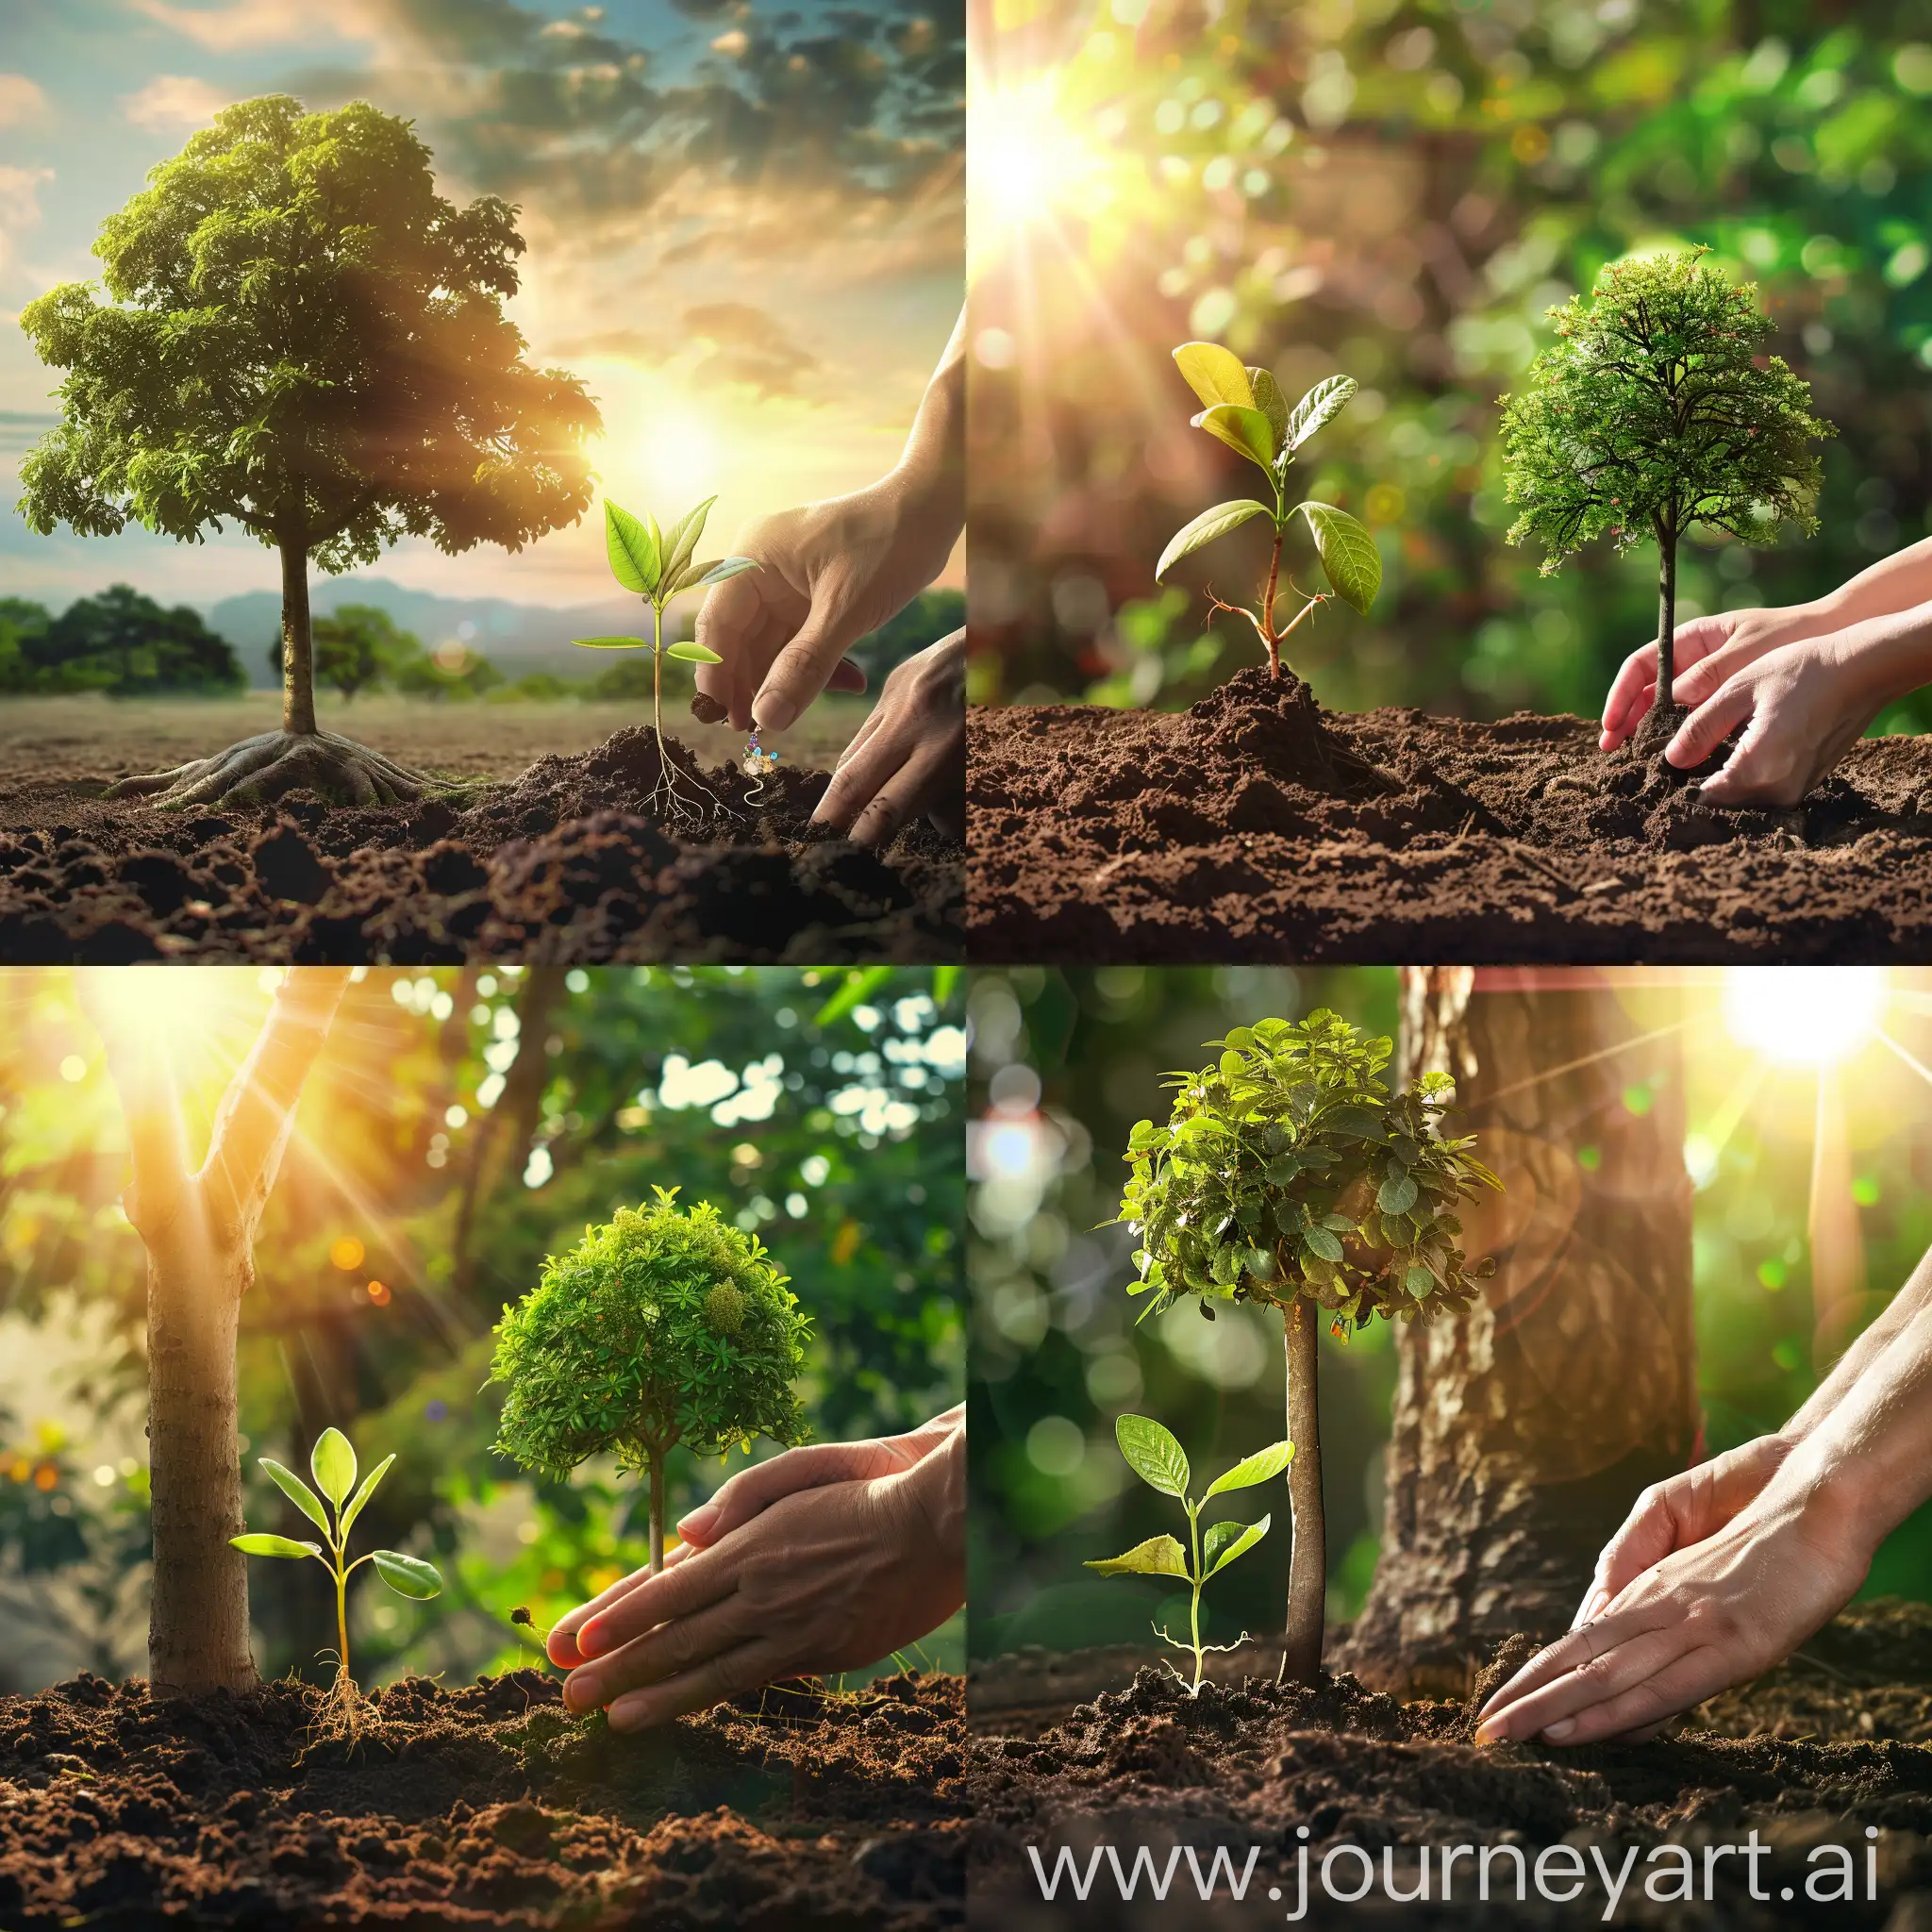 create a sunlit day with a sprout of a tree and beside it is a mature tree.
Add human hands planting the sprout